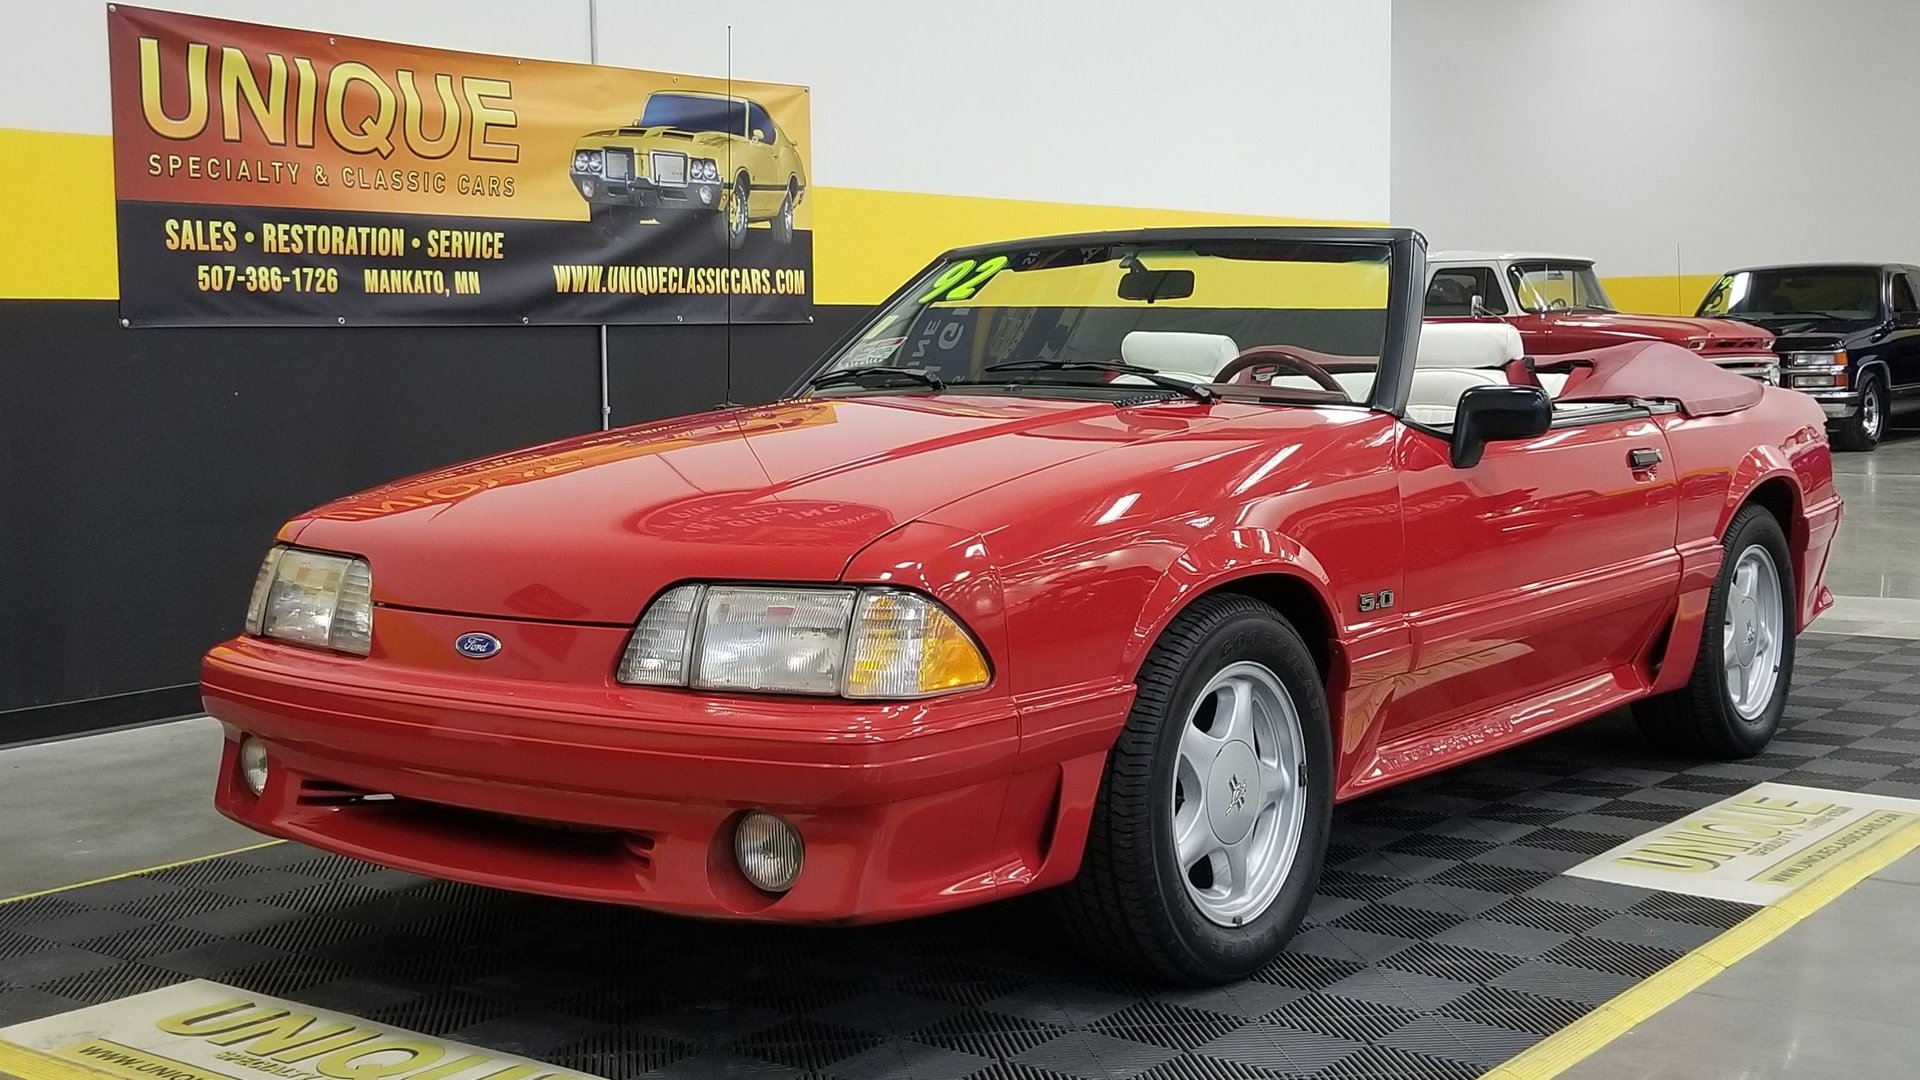 1992 Ford Mustang GT Convertible | eBay